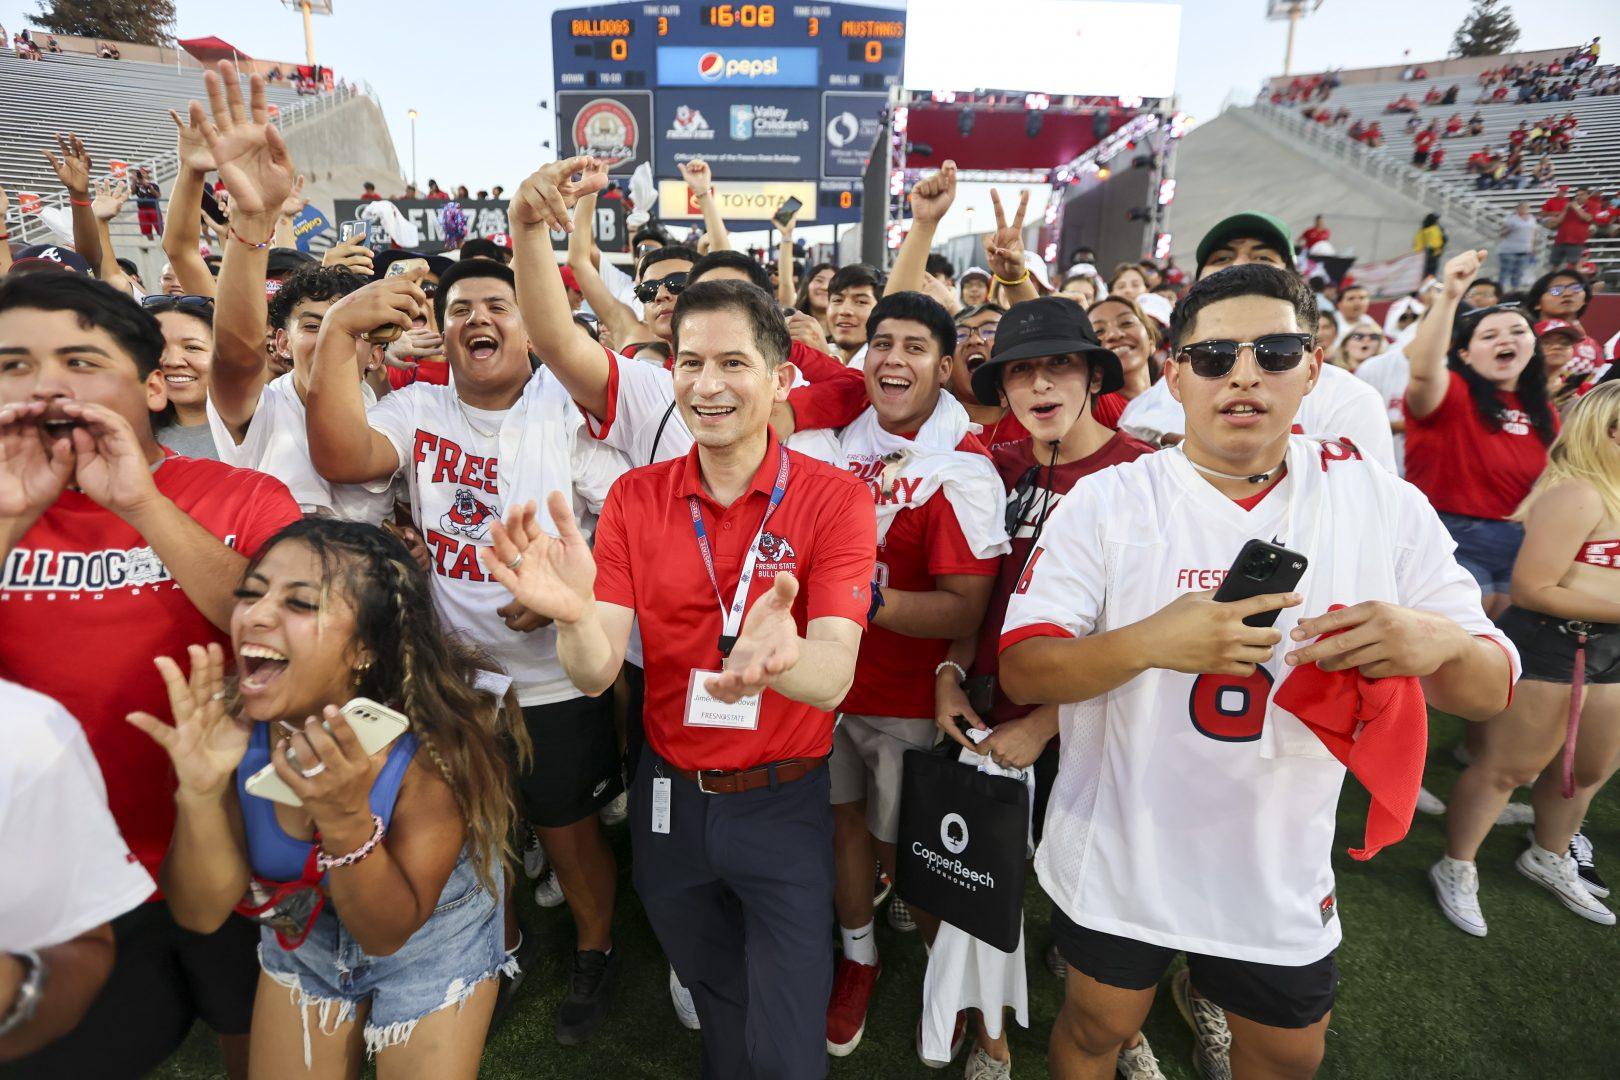 The+Fresno+State+Bulldogs+take+on+the+Cal+Poly+Mustangs+at+Valley+Children%E2%80%99s+Stadium+in+Fresno%2C+CA+on+September+1%2C+2022.+%28Courtesy+of+Fresno+State+Athletics%29